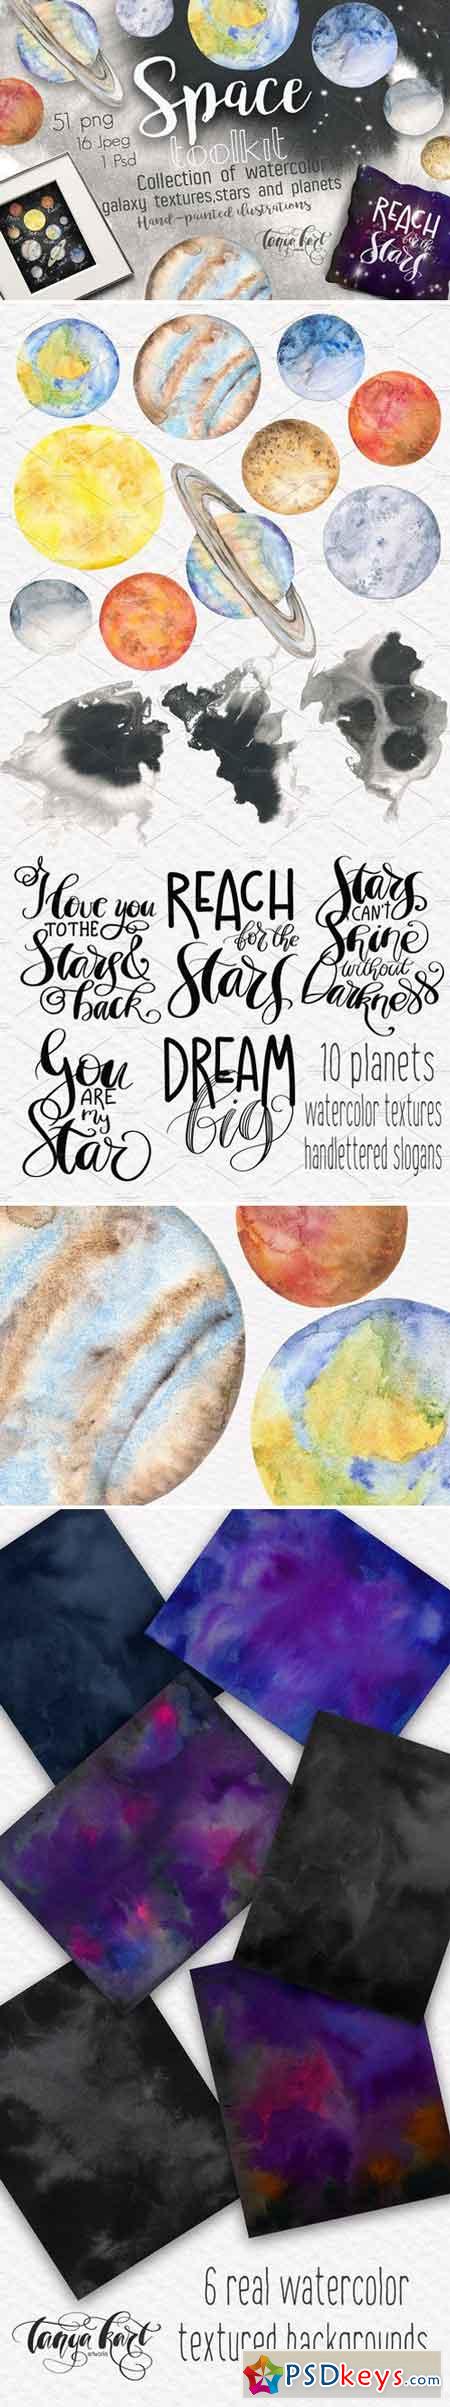 Space Toolkit Watercolor Planets 2354644